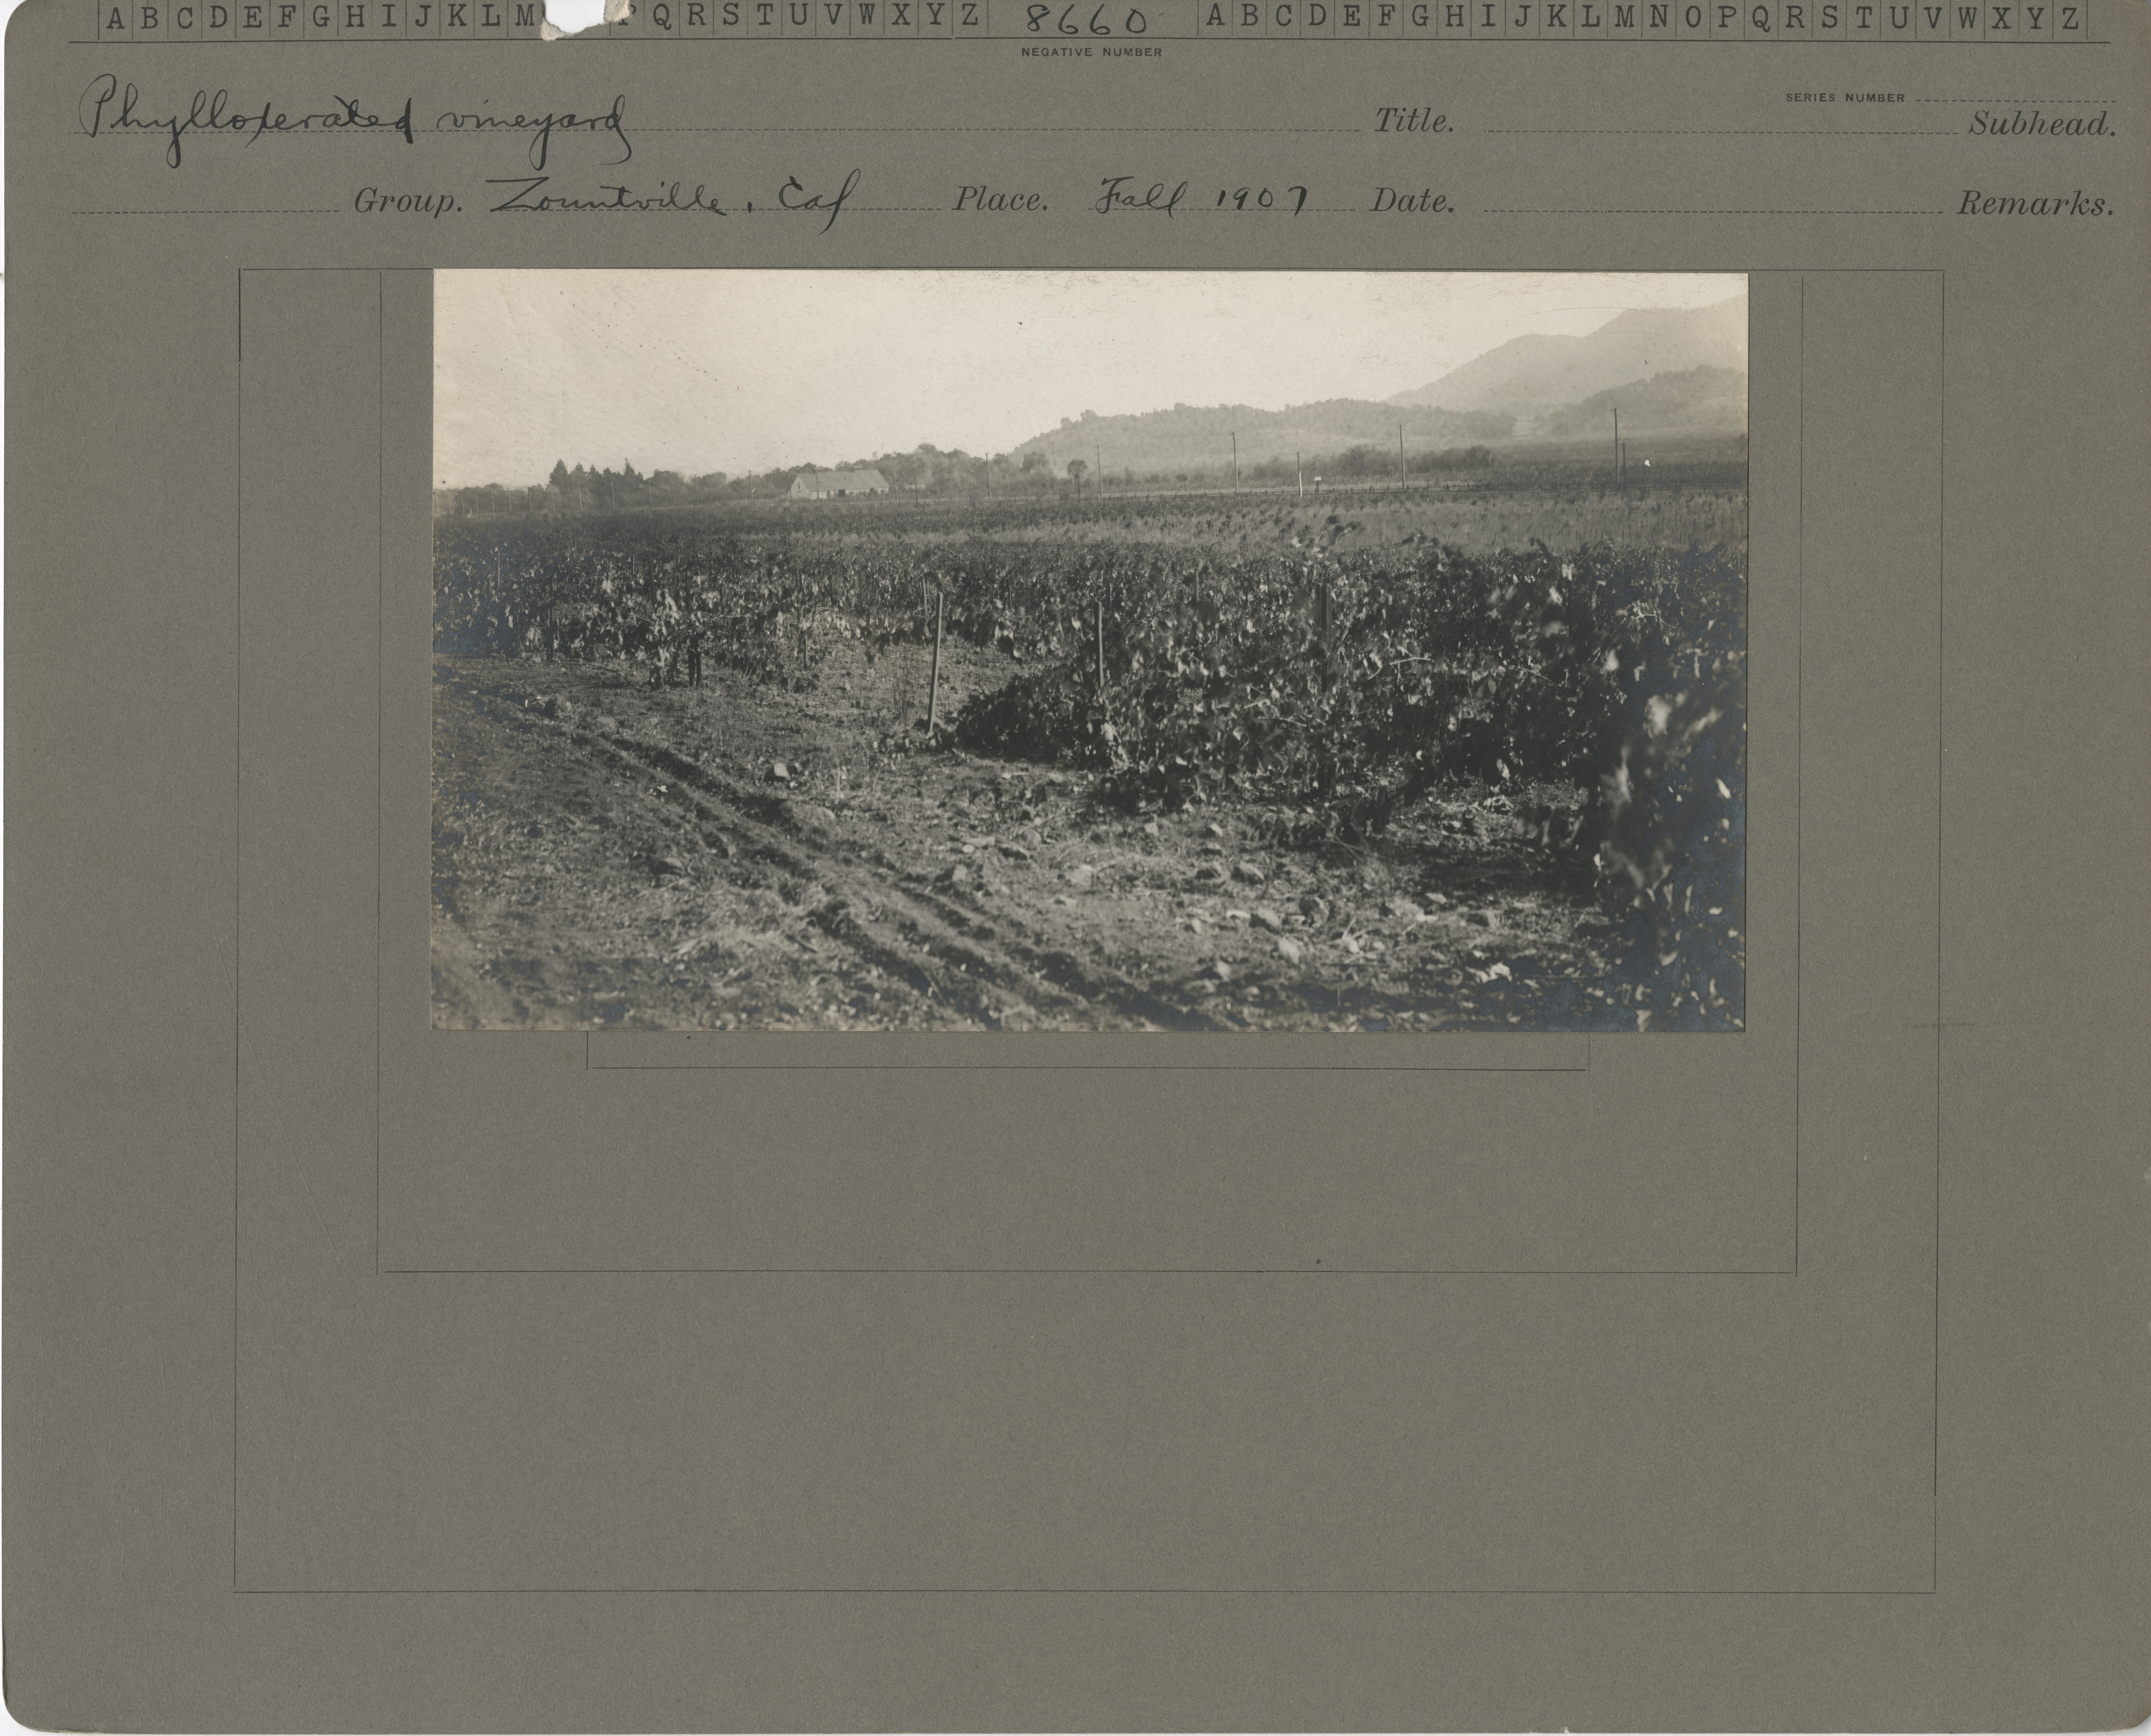 Phylloxerated vineyard in Yountville, California. Fall 1907.